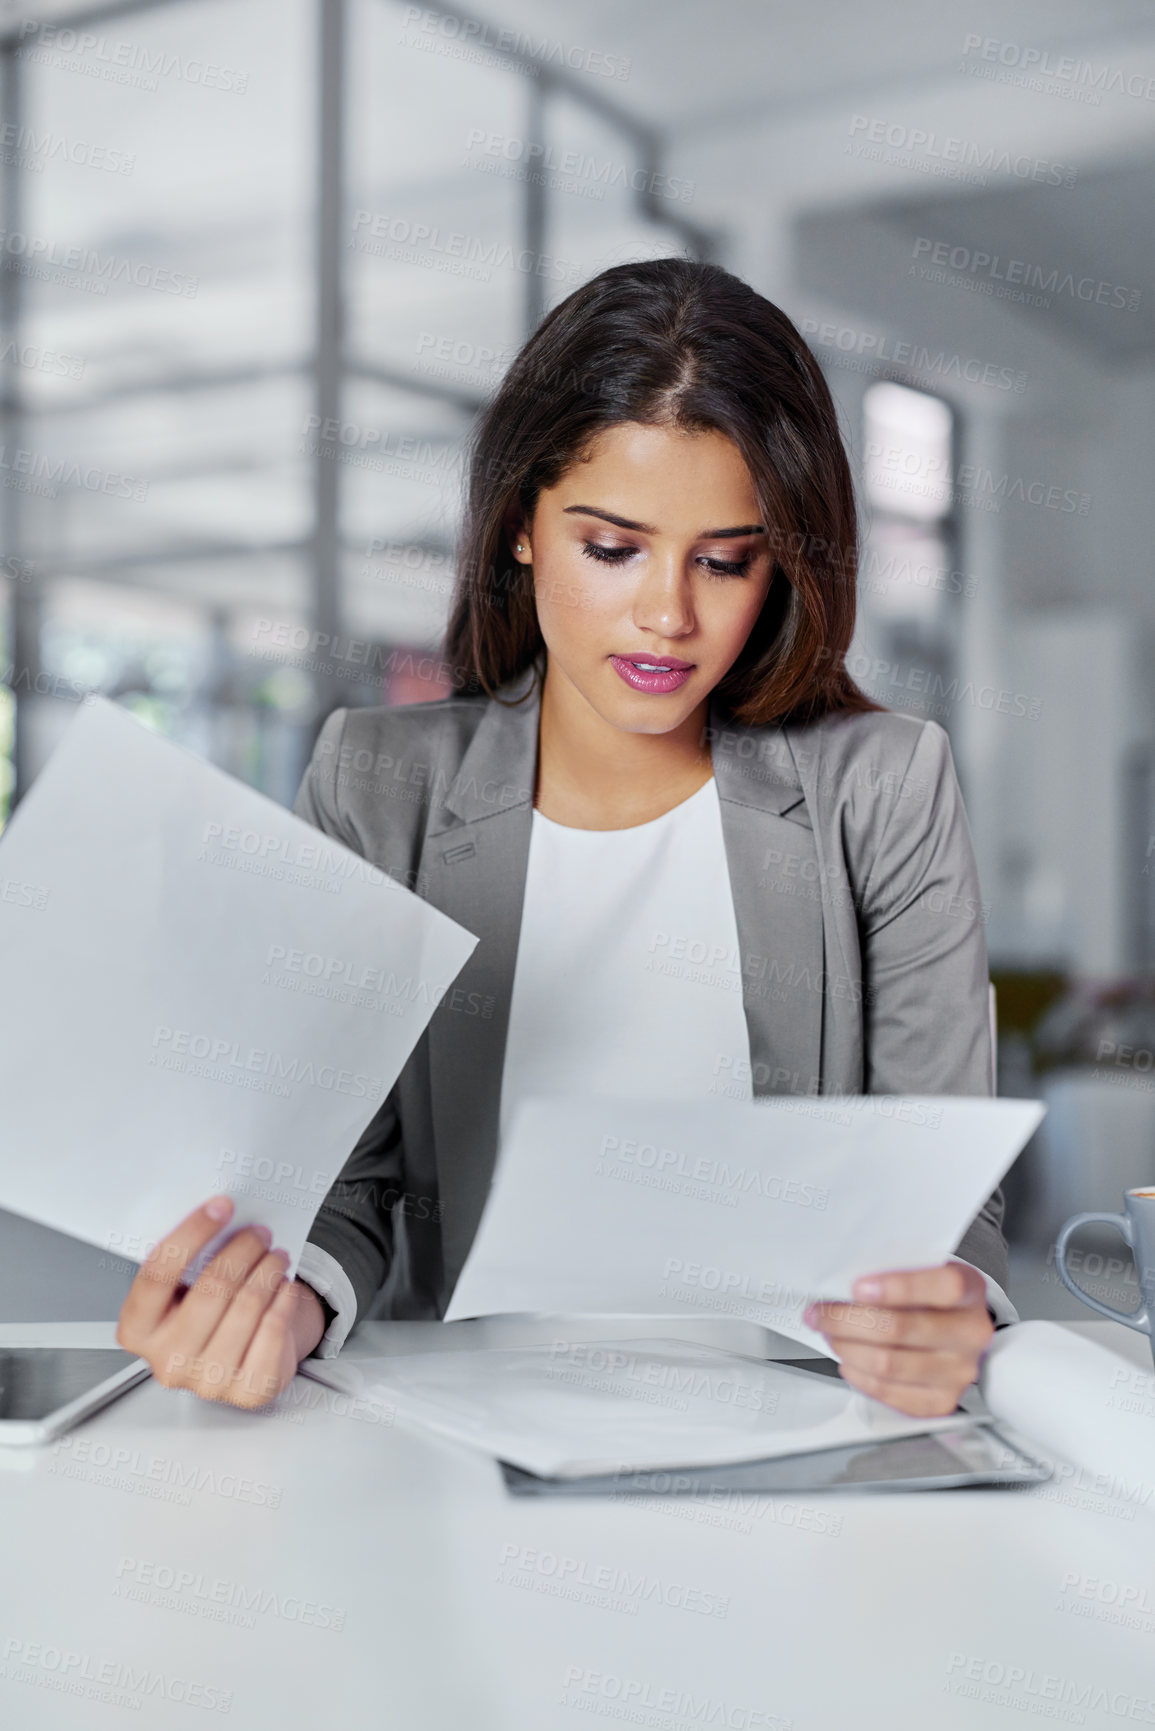 Buy stock photo Cropped shot of a young businesswoman looking through some paperwork in an office